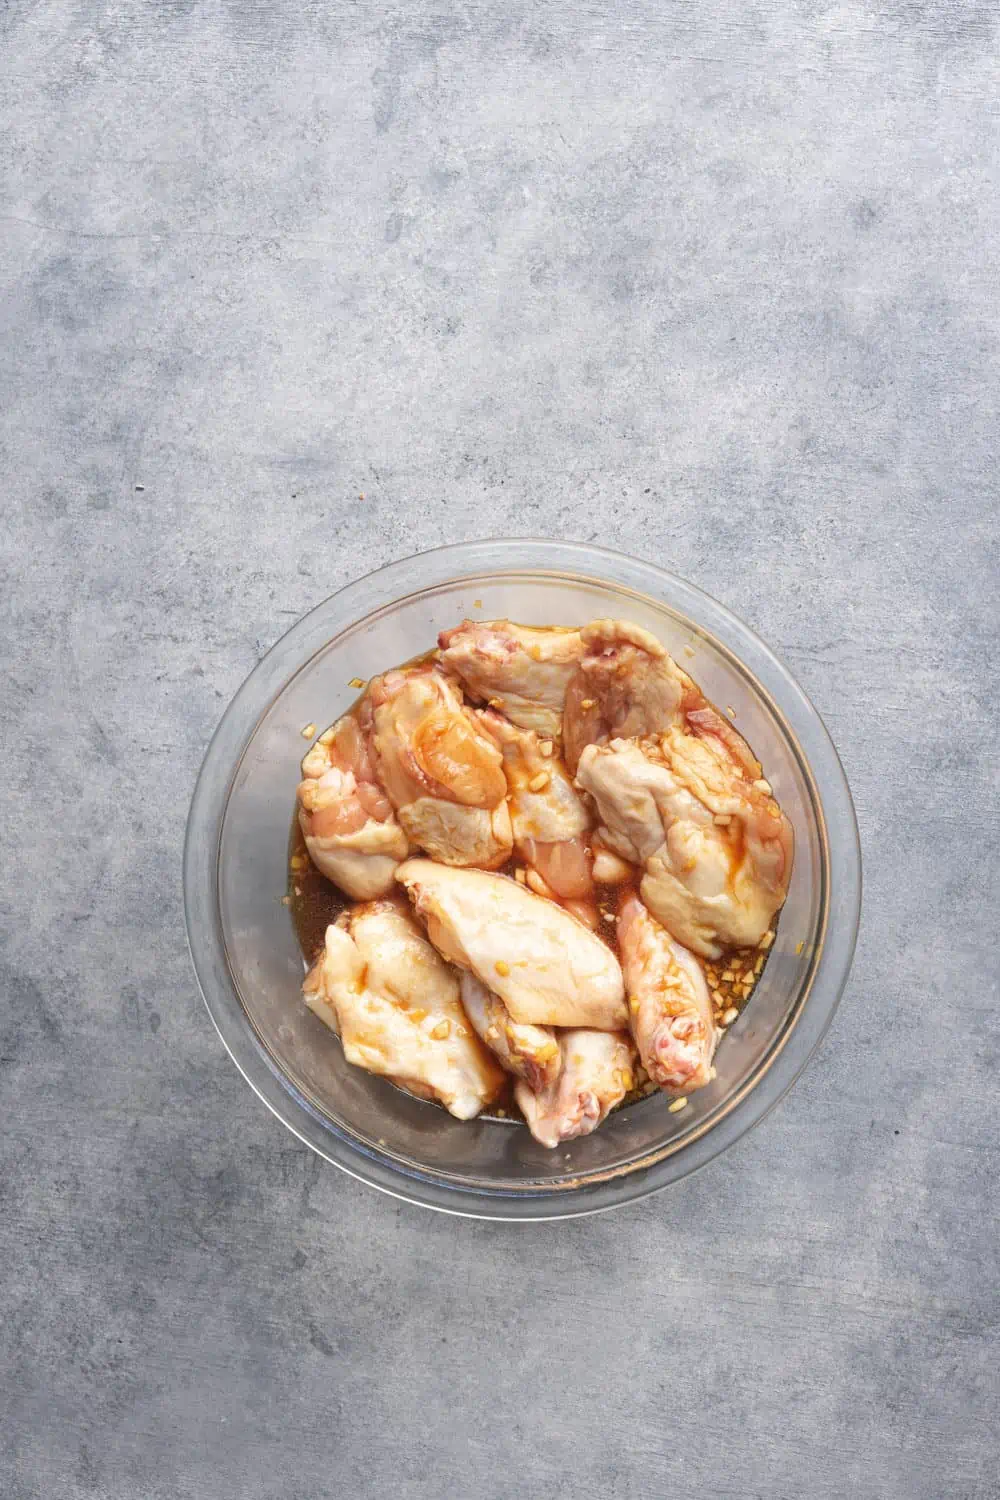 Chicken wings marinating in a bowl.